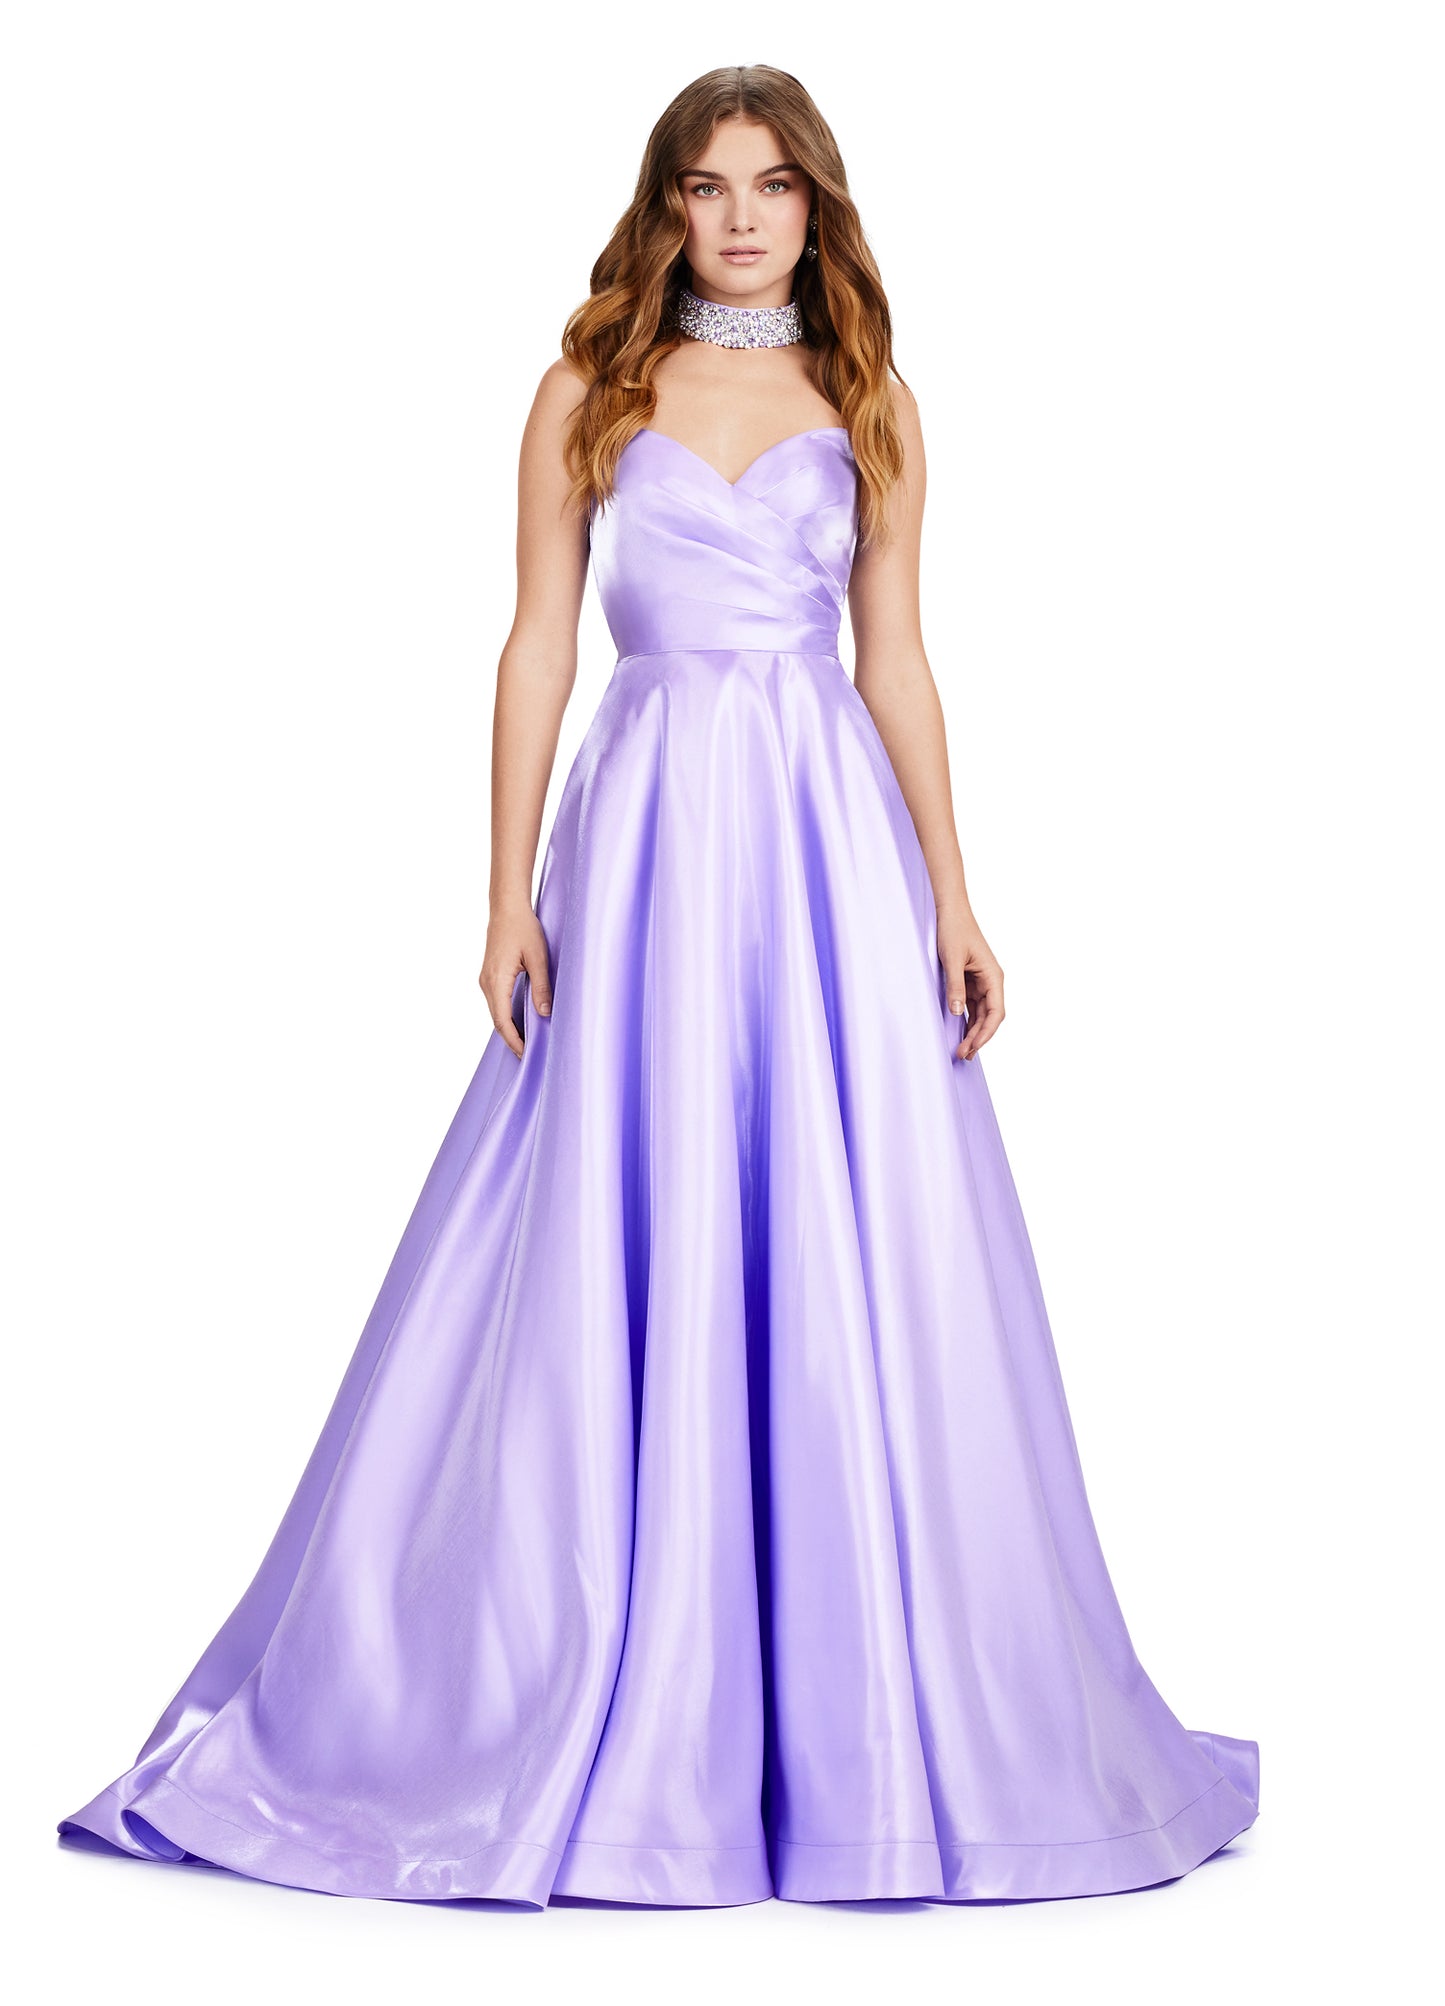 Elevate your eveningwear with the Ashley Lauren 11473 Long Prom Dress. Crafted from luxurious satin, this strapless ball gown features a beaded choker neckline for a touch of glamour. Perfect for formal events and pageants, this dress will make you feel like a true princess. Be the belle of the ball in this fabulous A-Line ball gown. This strapless satin dress features a sweetheart neckline and a fully beaded choker to match.